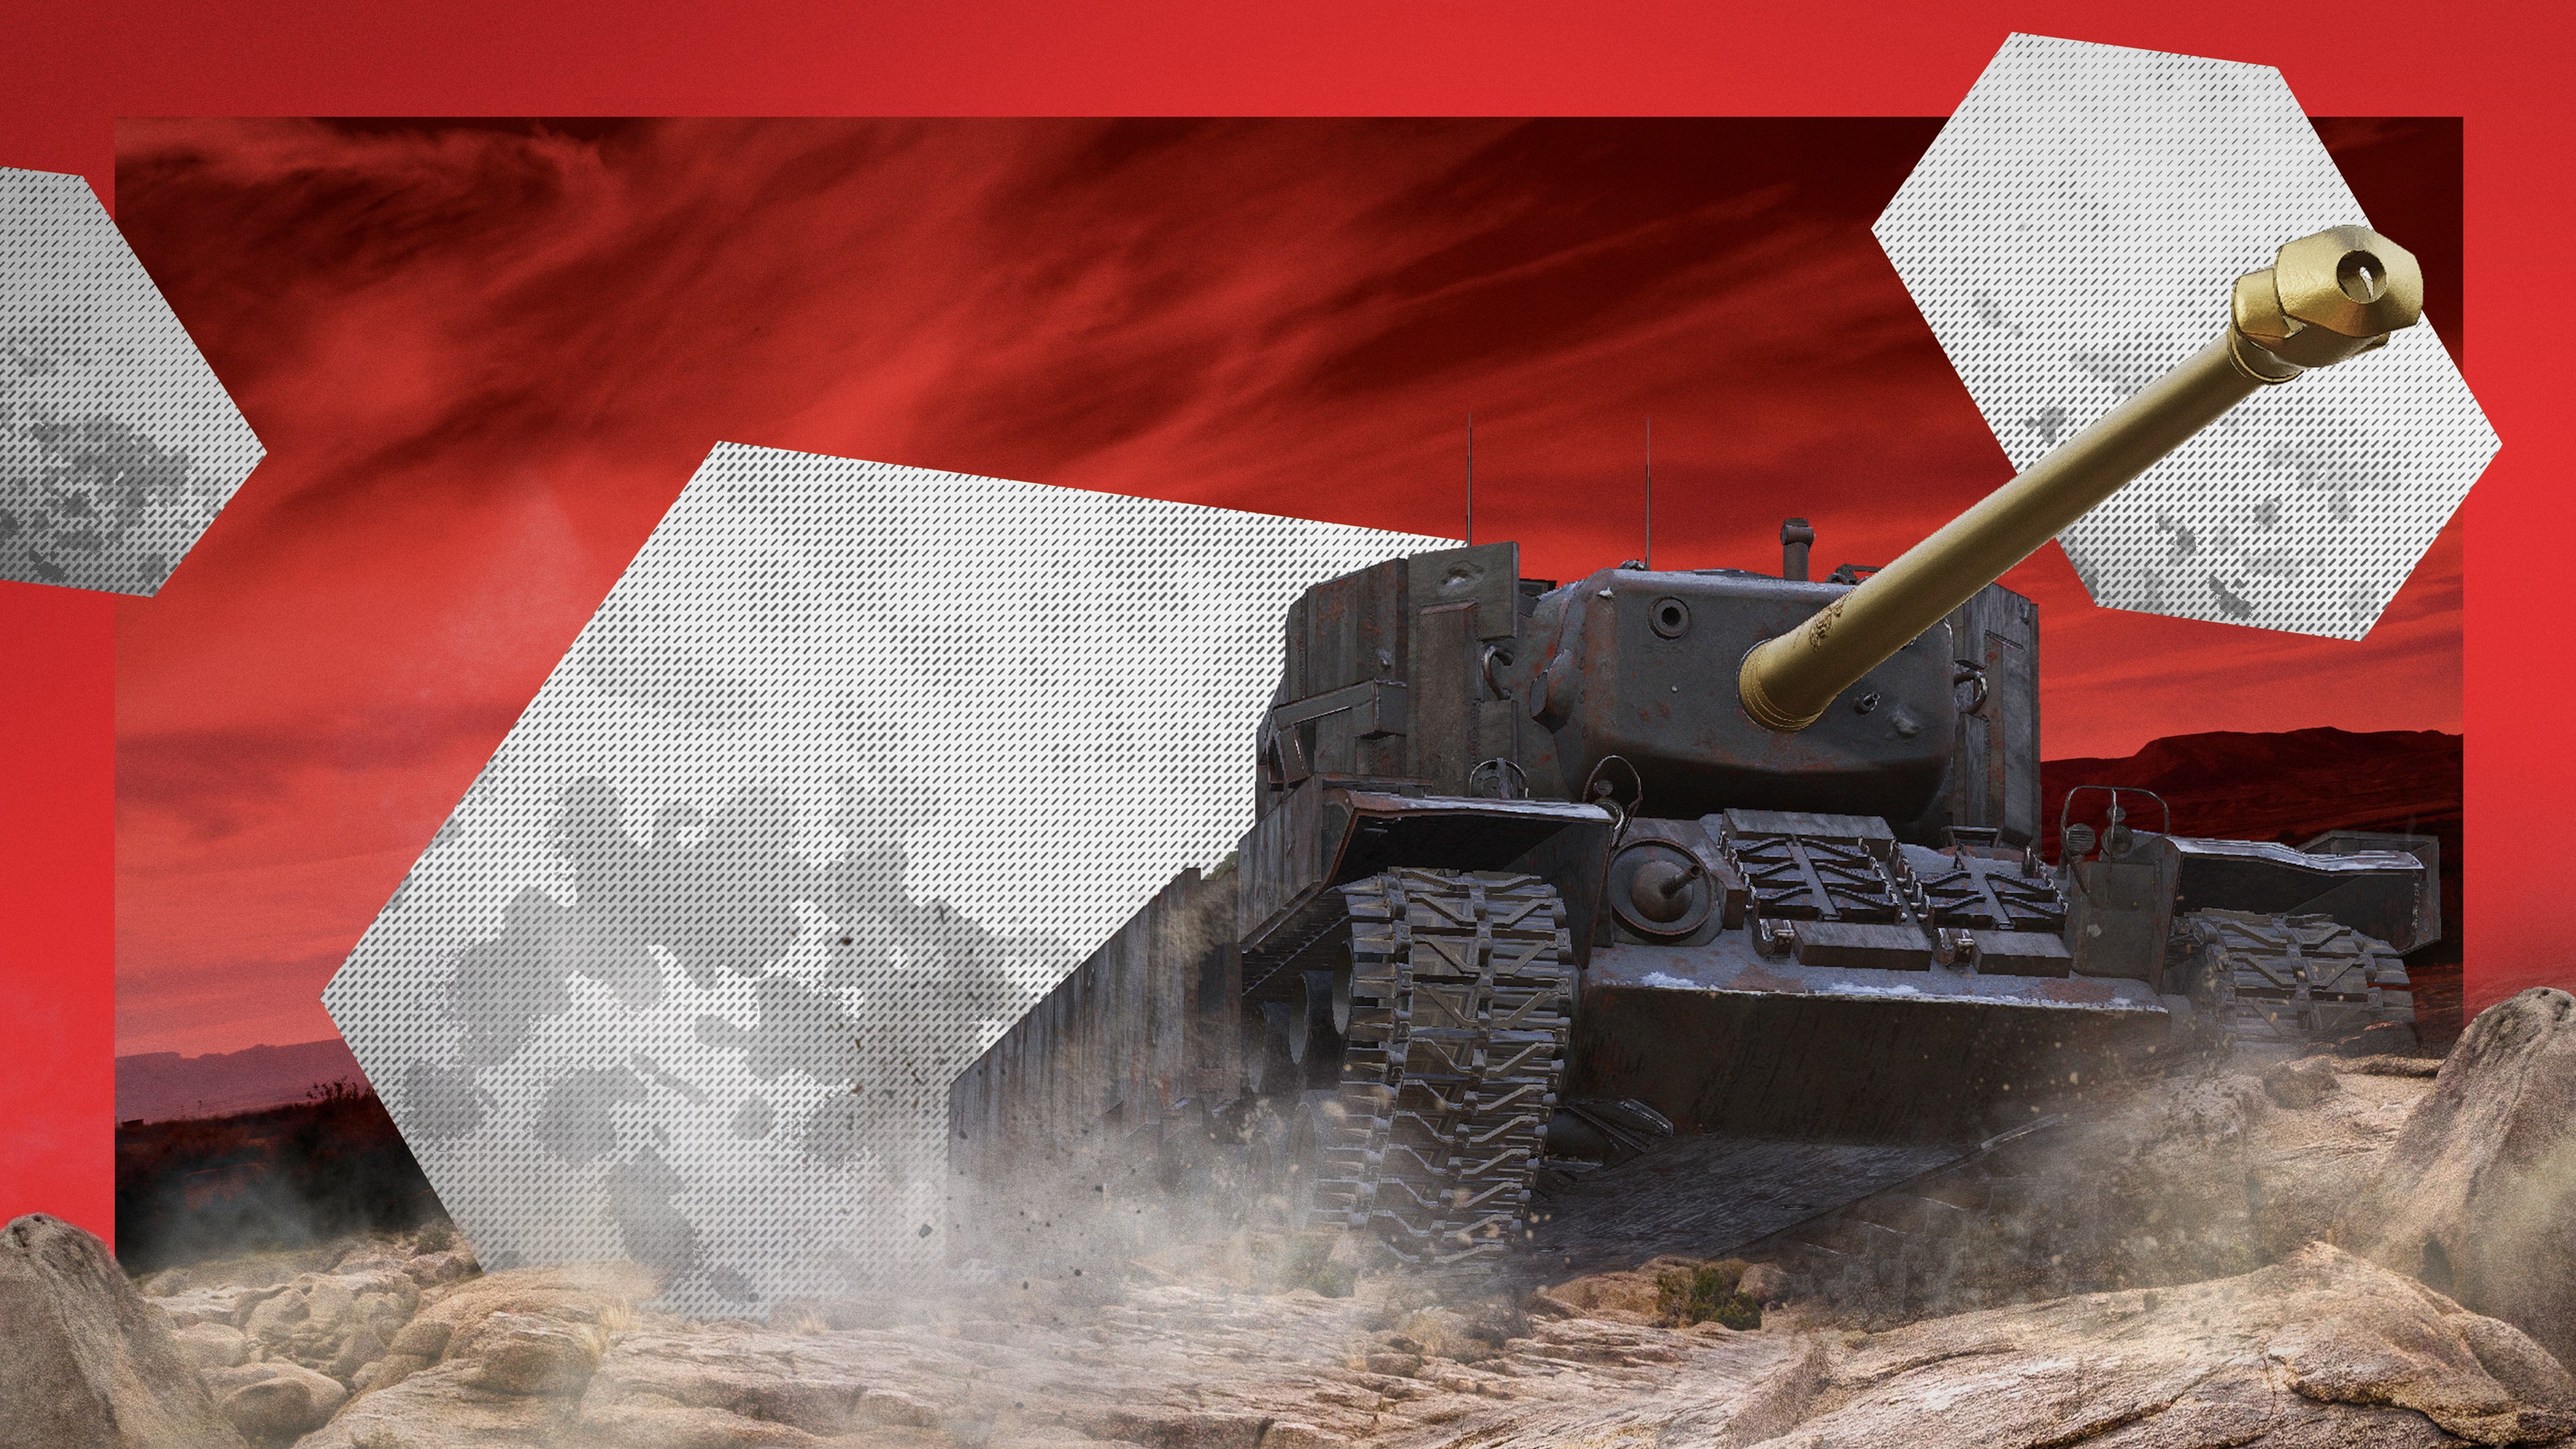 World of Tanks – Tank of the Month: Minuteman T29